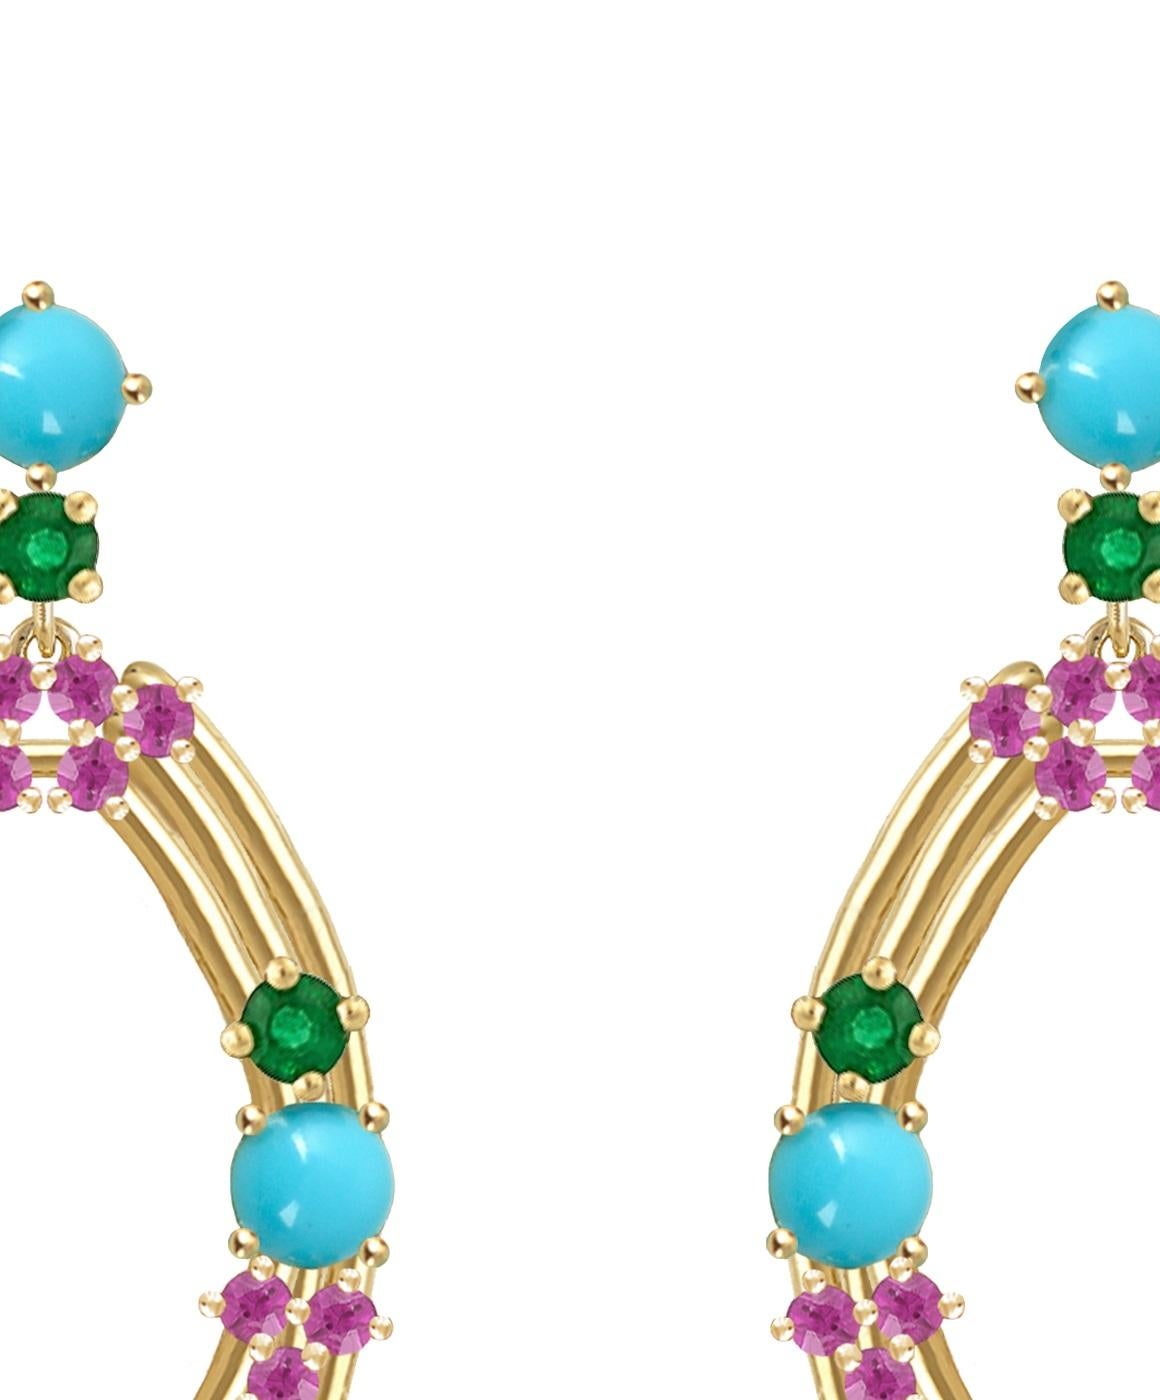 Rough Cut Colorful Earrings in 18 Karat Gold with Pink Sapphires, Emeralds, Turquoise